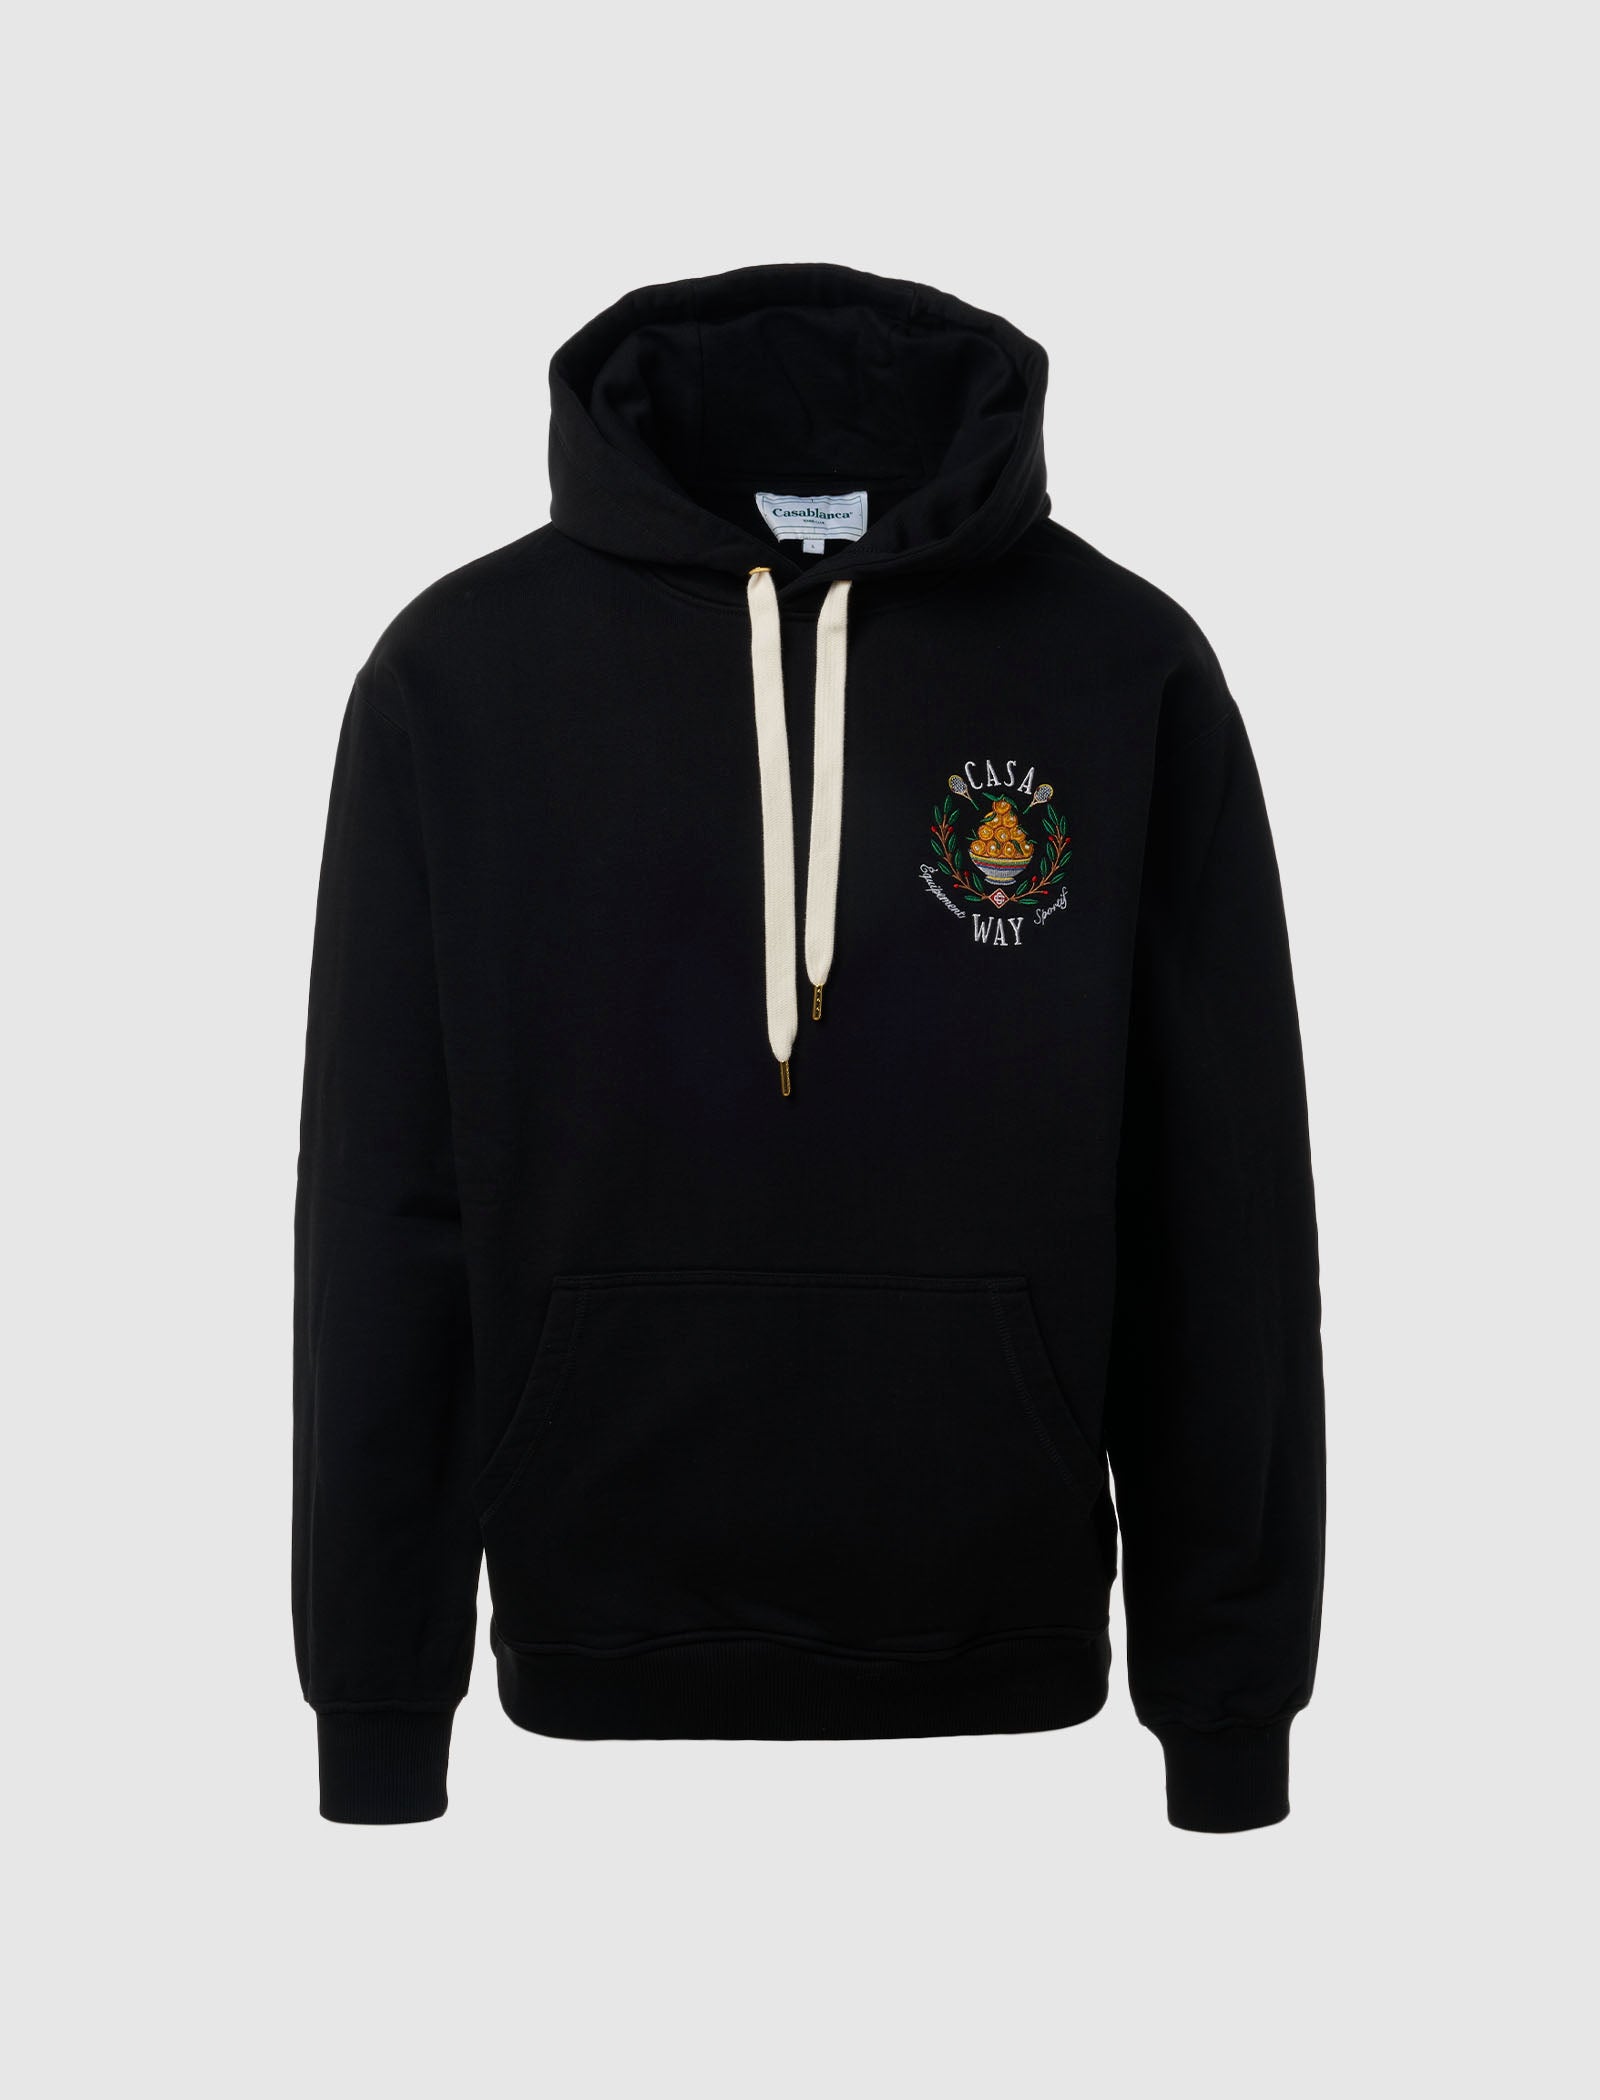 CASA WAY EMBROIDERED HOODIE